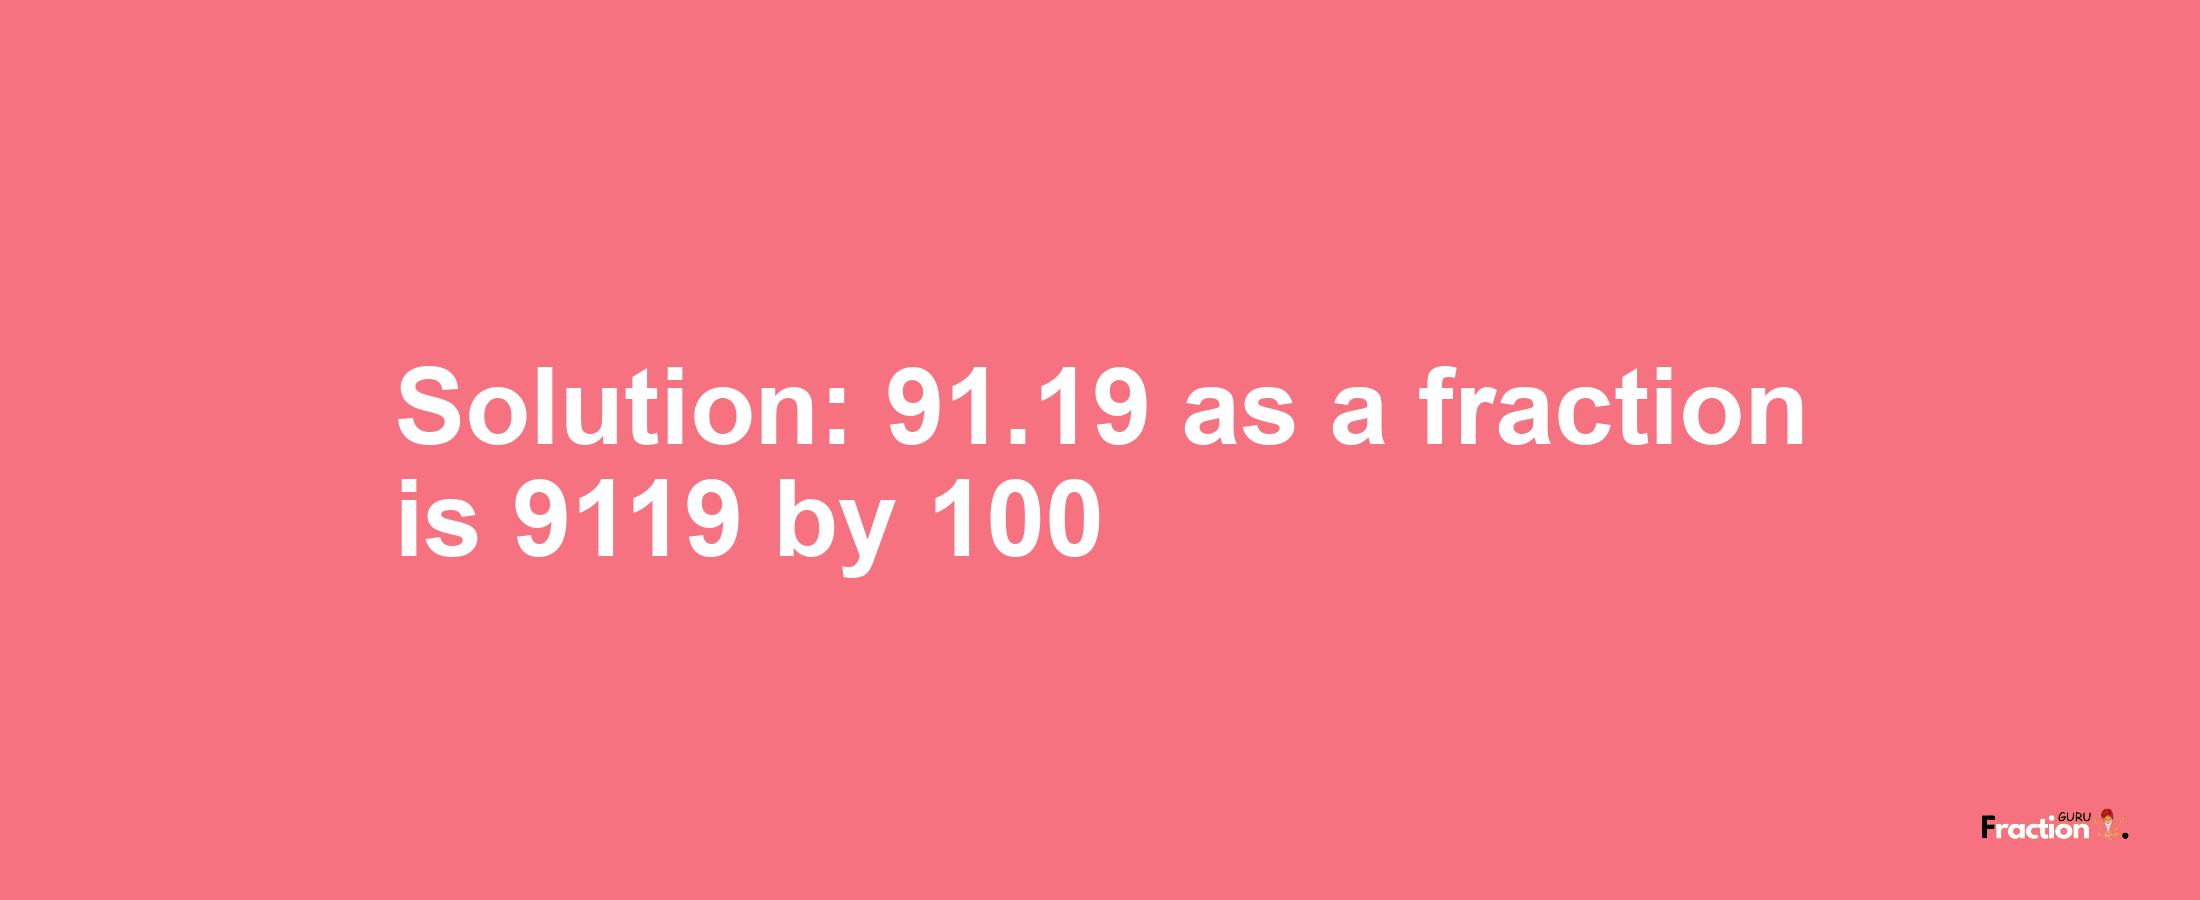 Solution:91.19 as a fraction is 9119/100